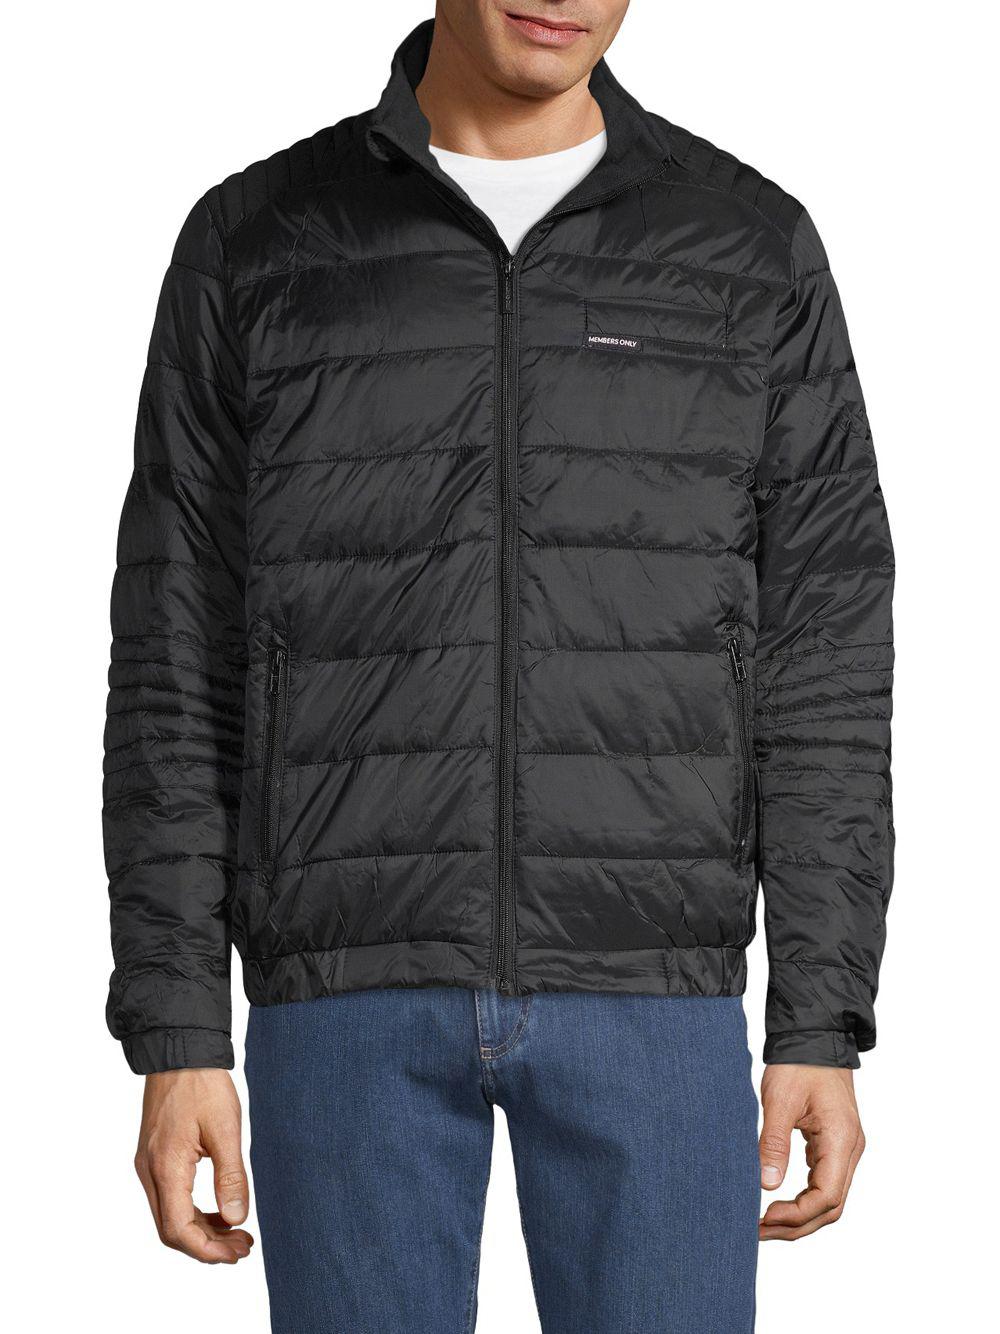 Lyst - Members Only Stand Collar Puffer Jacket in Black for Men